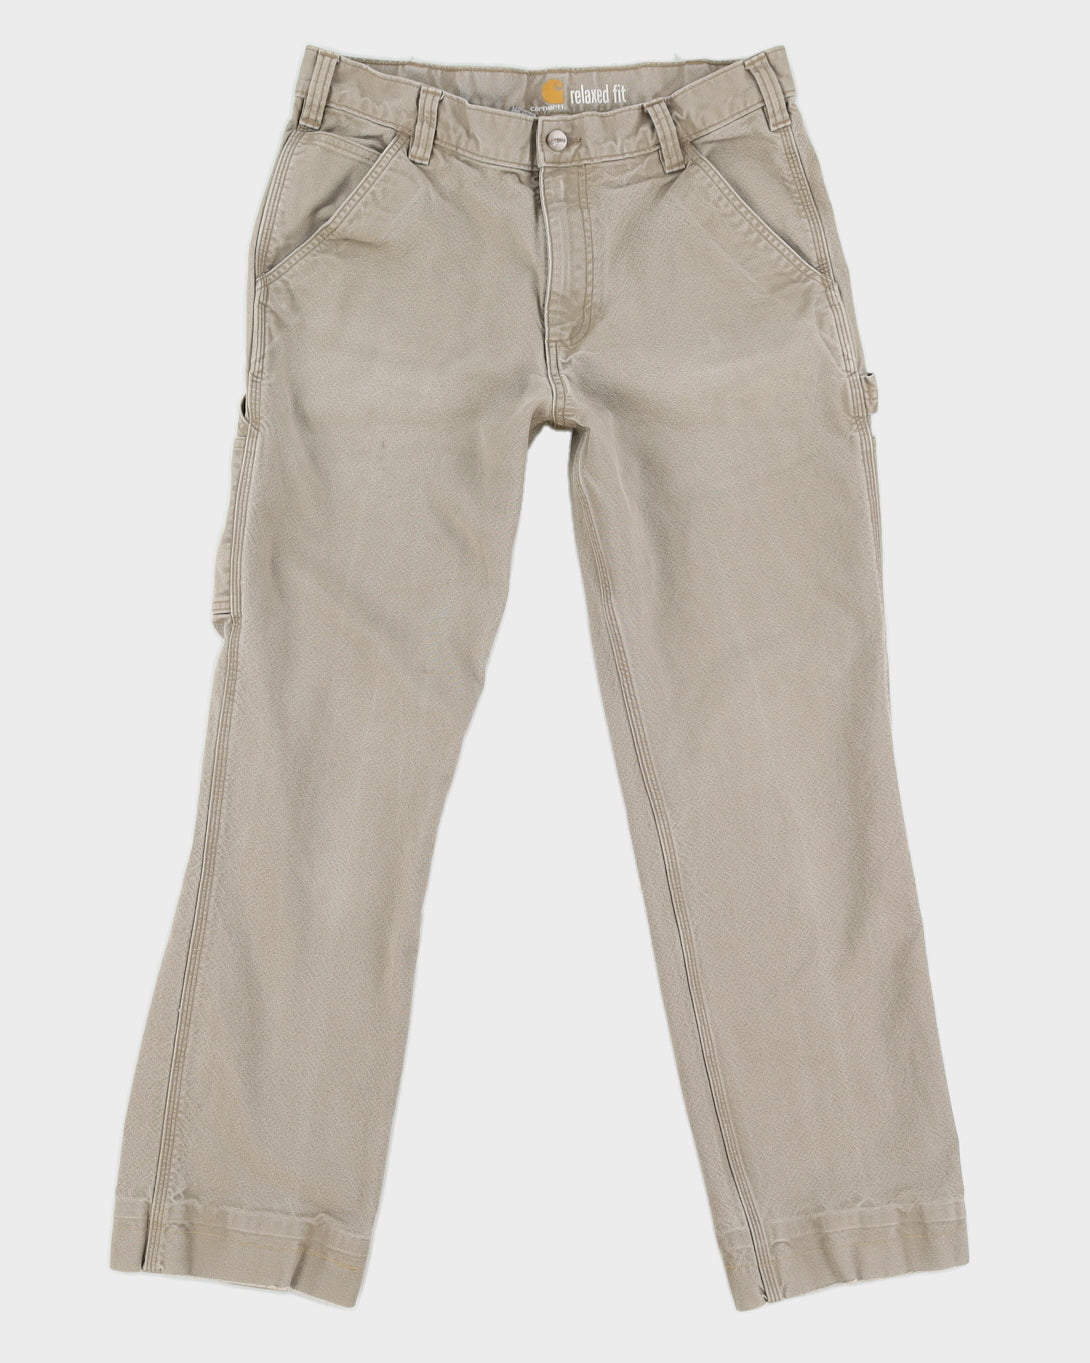 Carhartt Khaki Relaxed Fit Trousers - W34